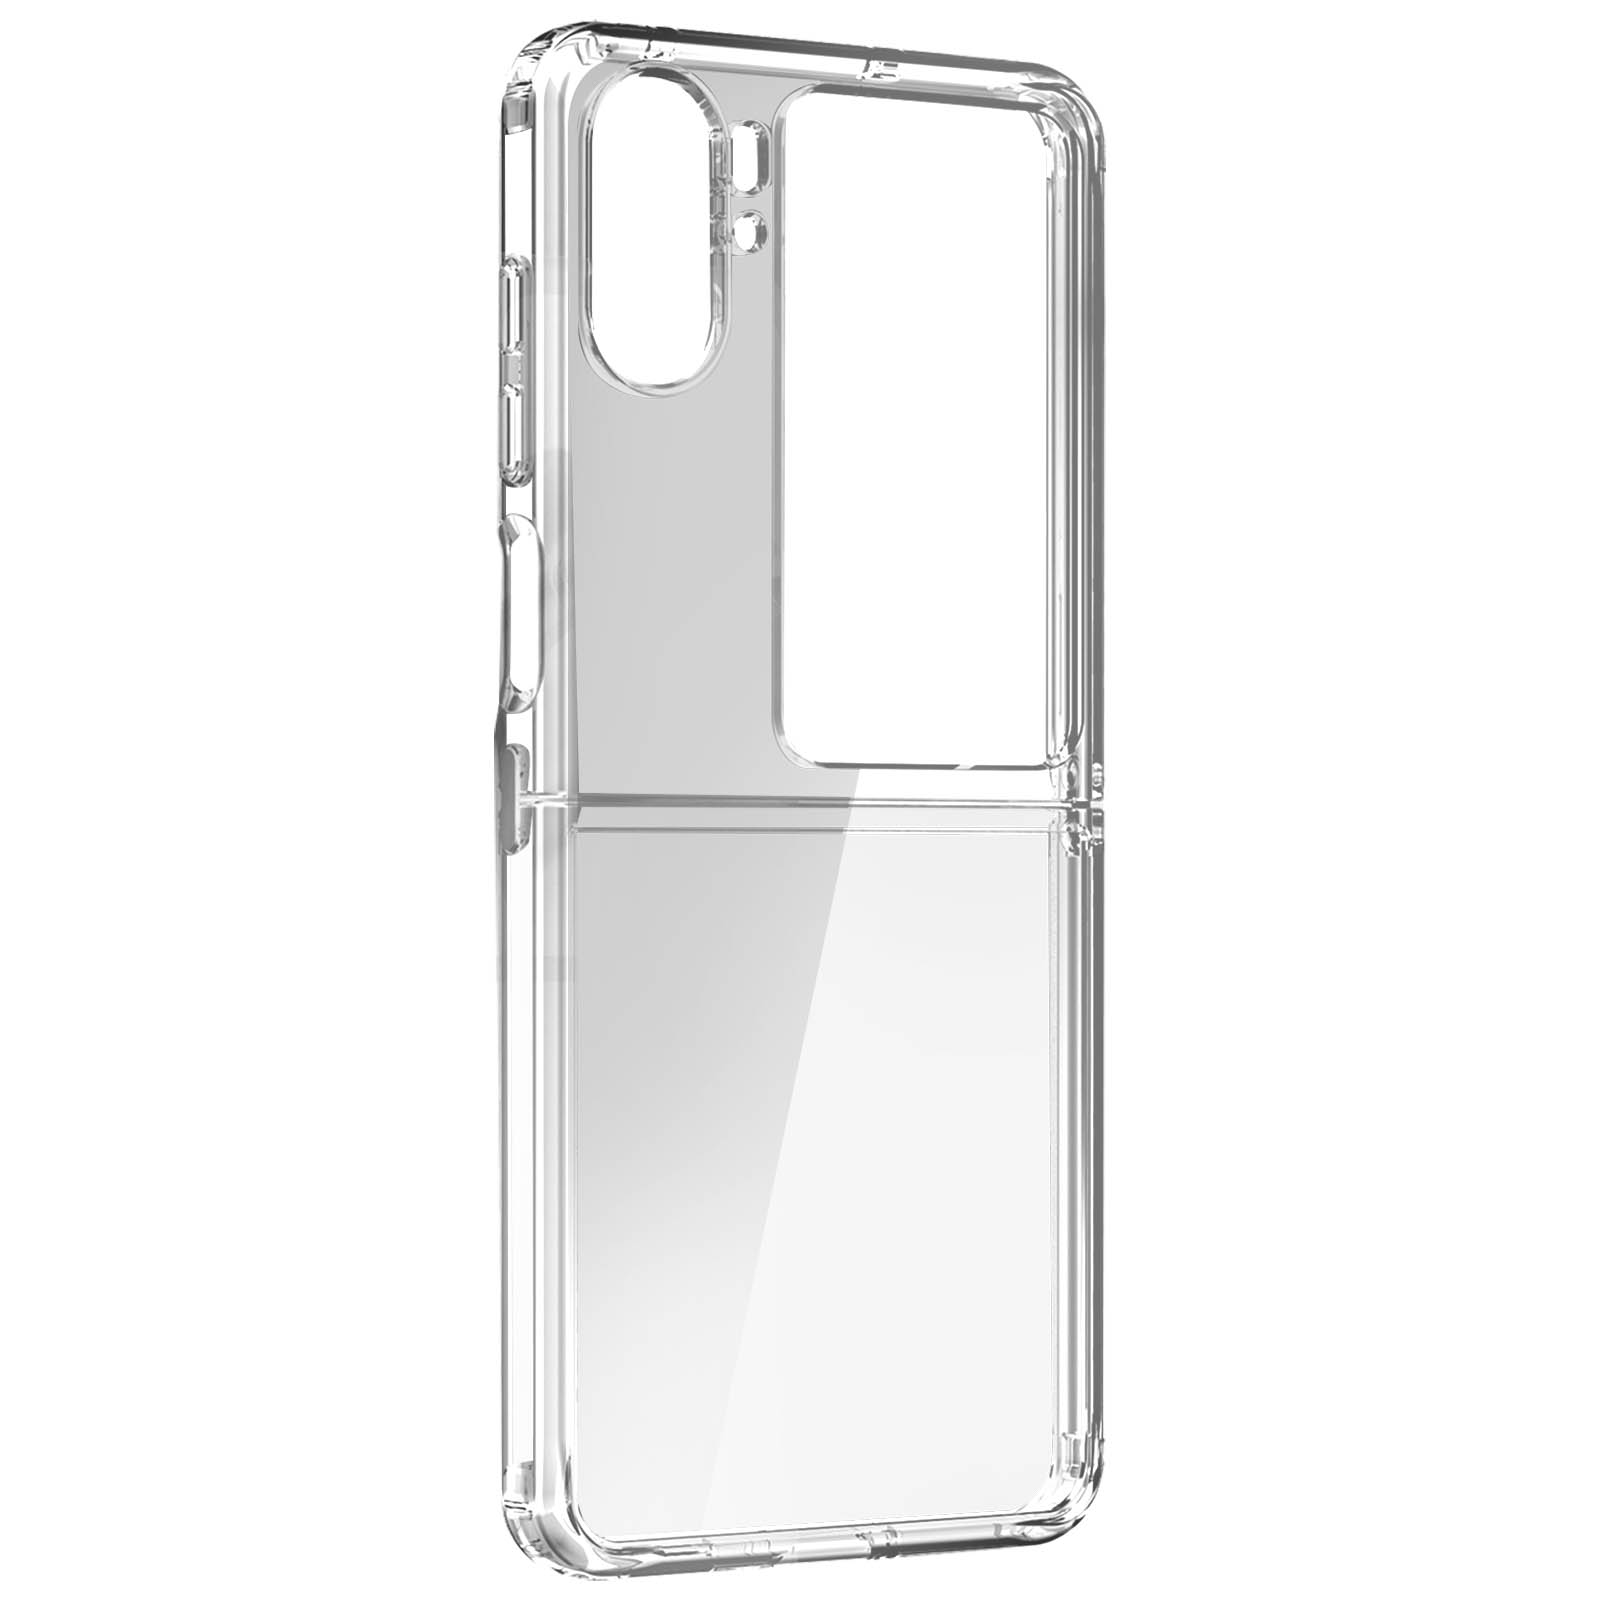 Series, N2 Find Transparent Clin Oppo, DUCIS Flip, Backcover, DUX